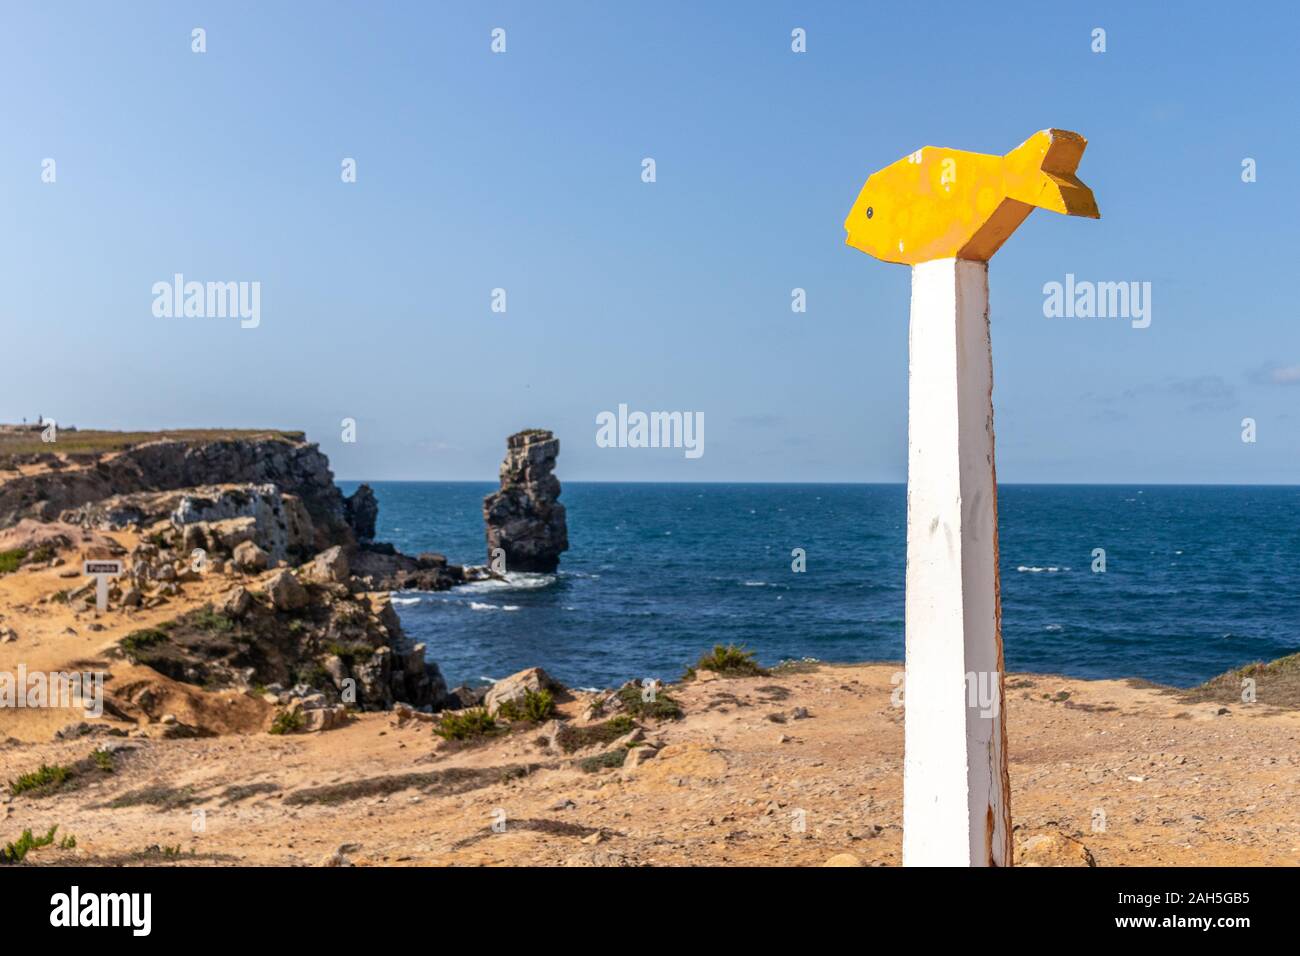 Fish's view over ocean rocks in Portugal. Stock Photo